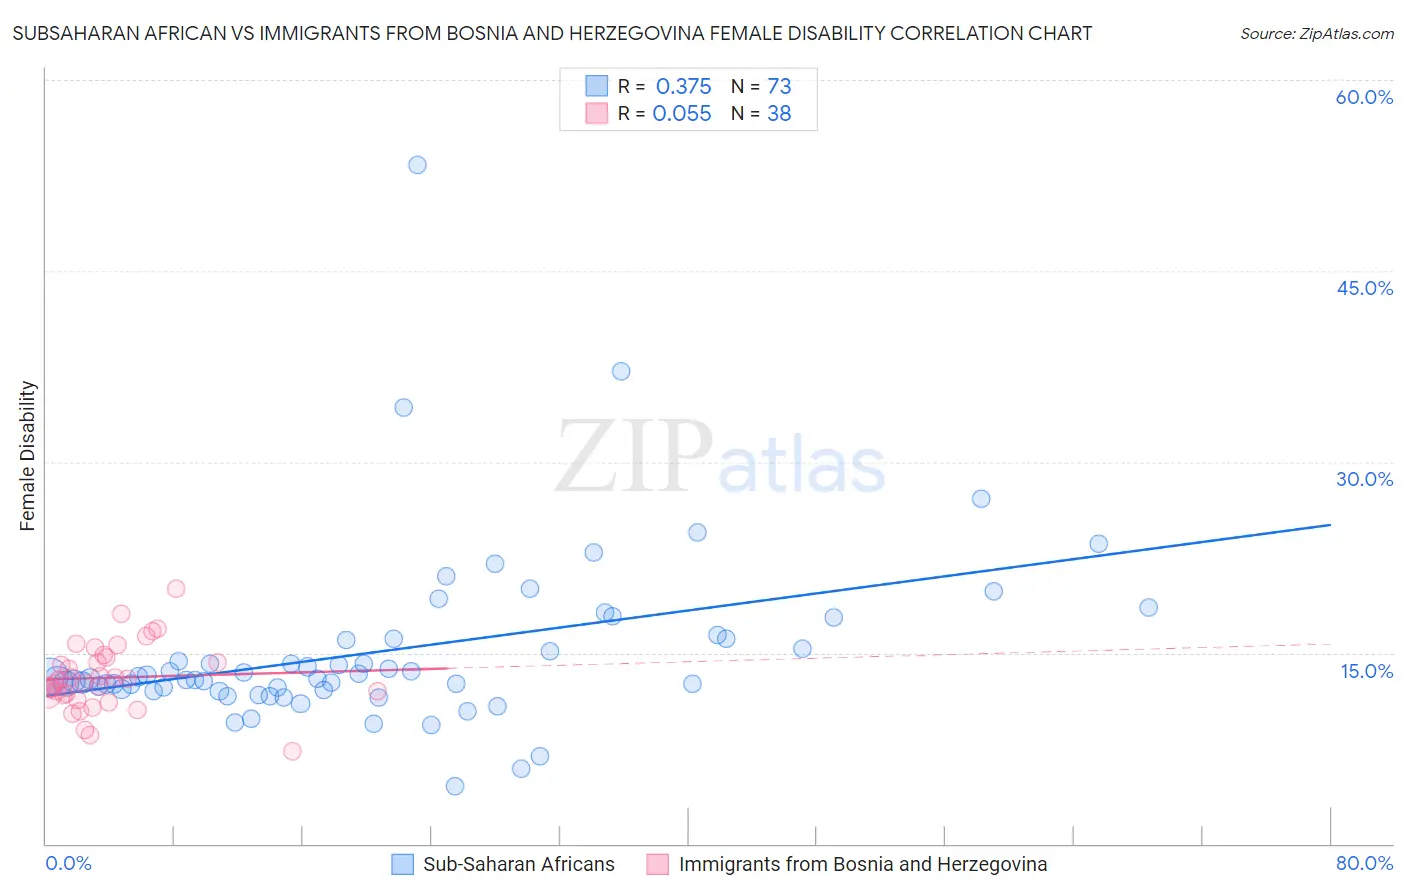 Subsaharan African vs Immigrants from Bosnia and Herzegovina Female Disability